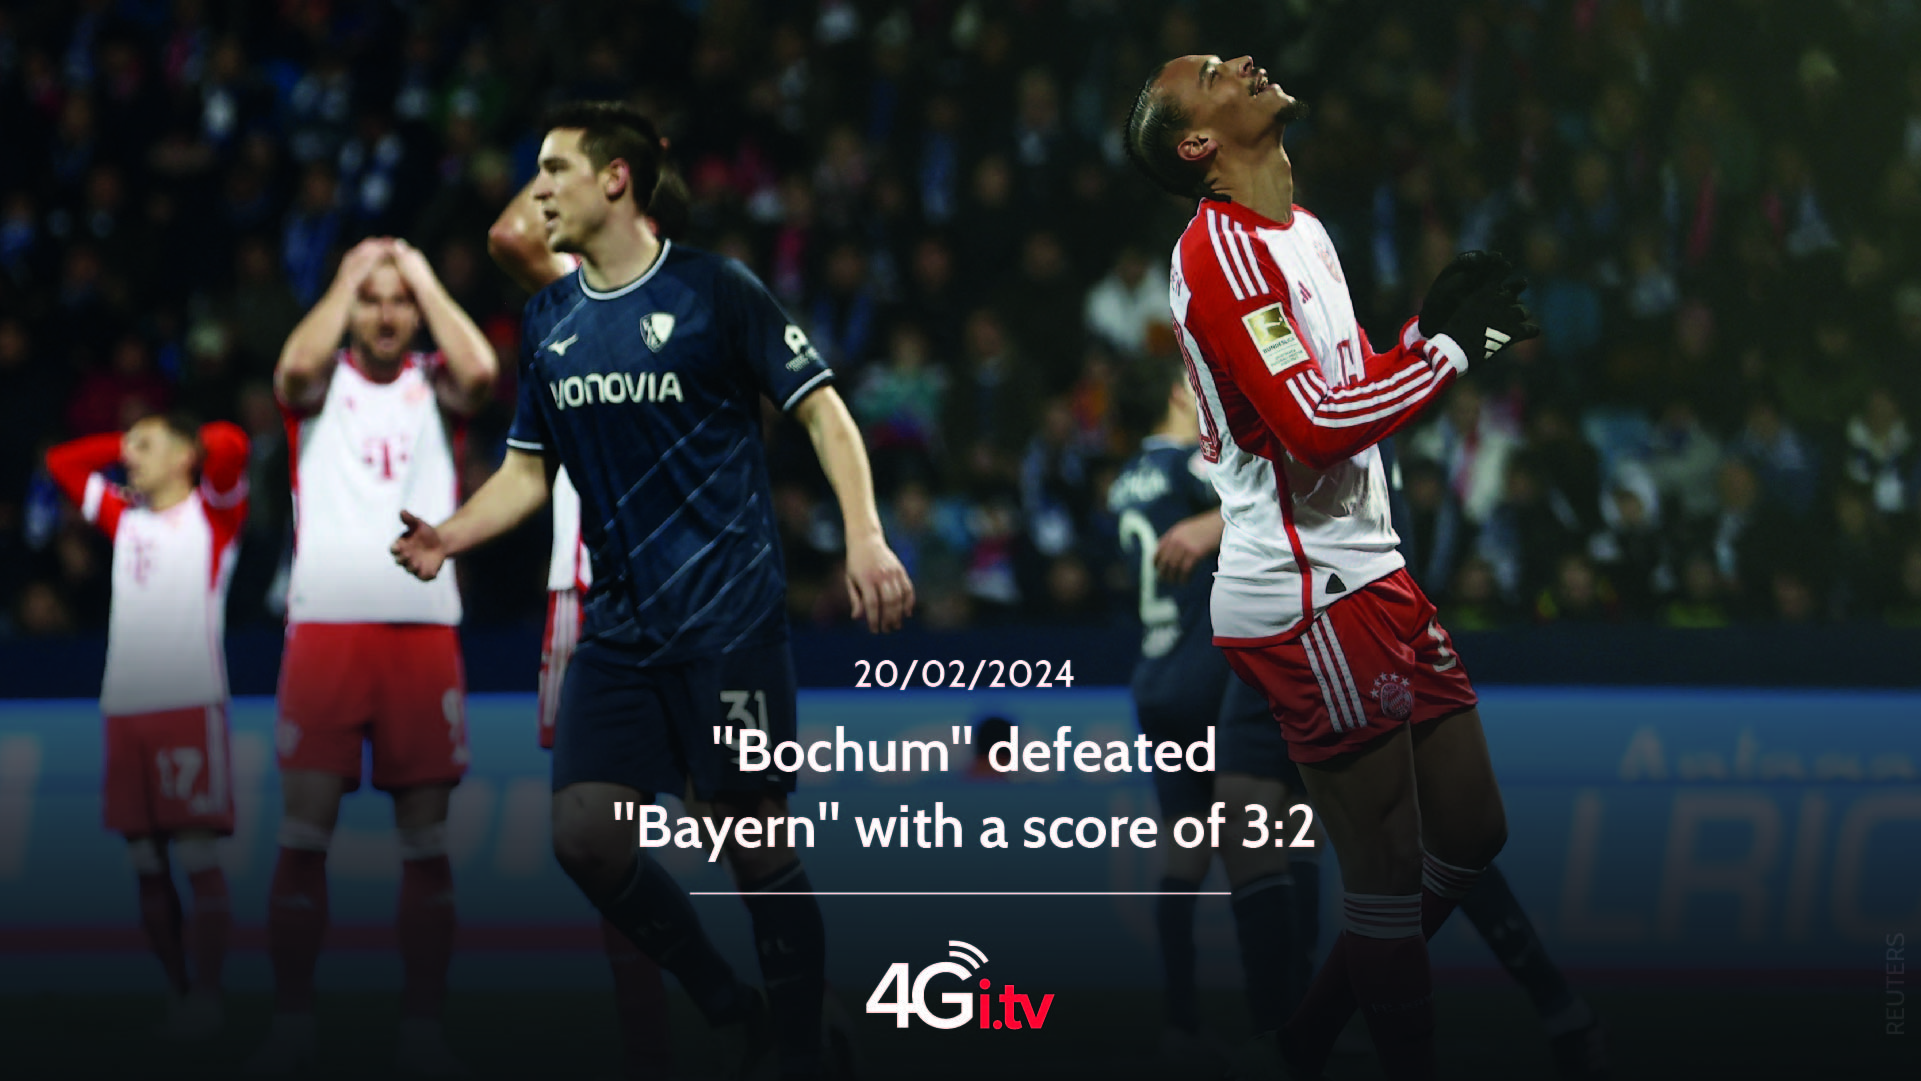 Read more about the article “Bochum” defeated “Bayern” with a score of 3:2 